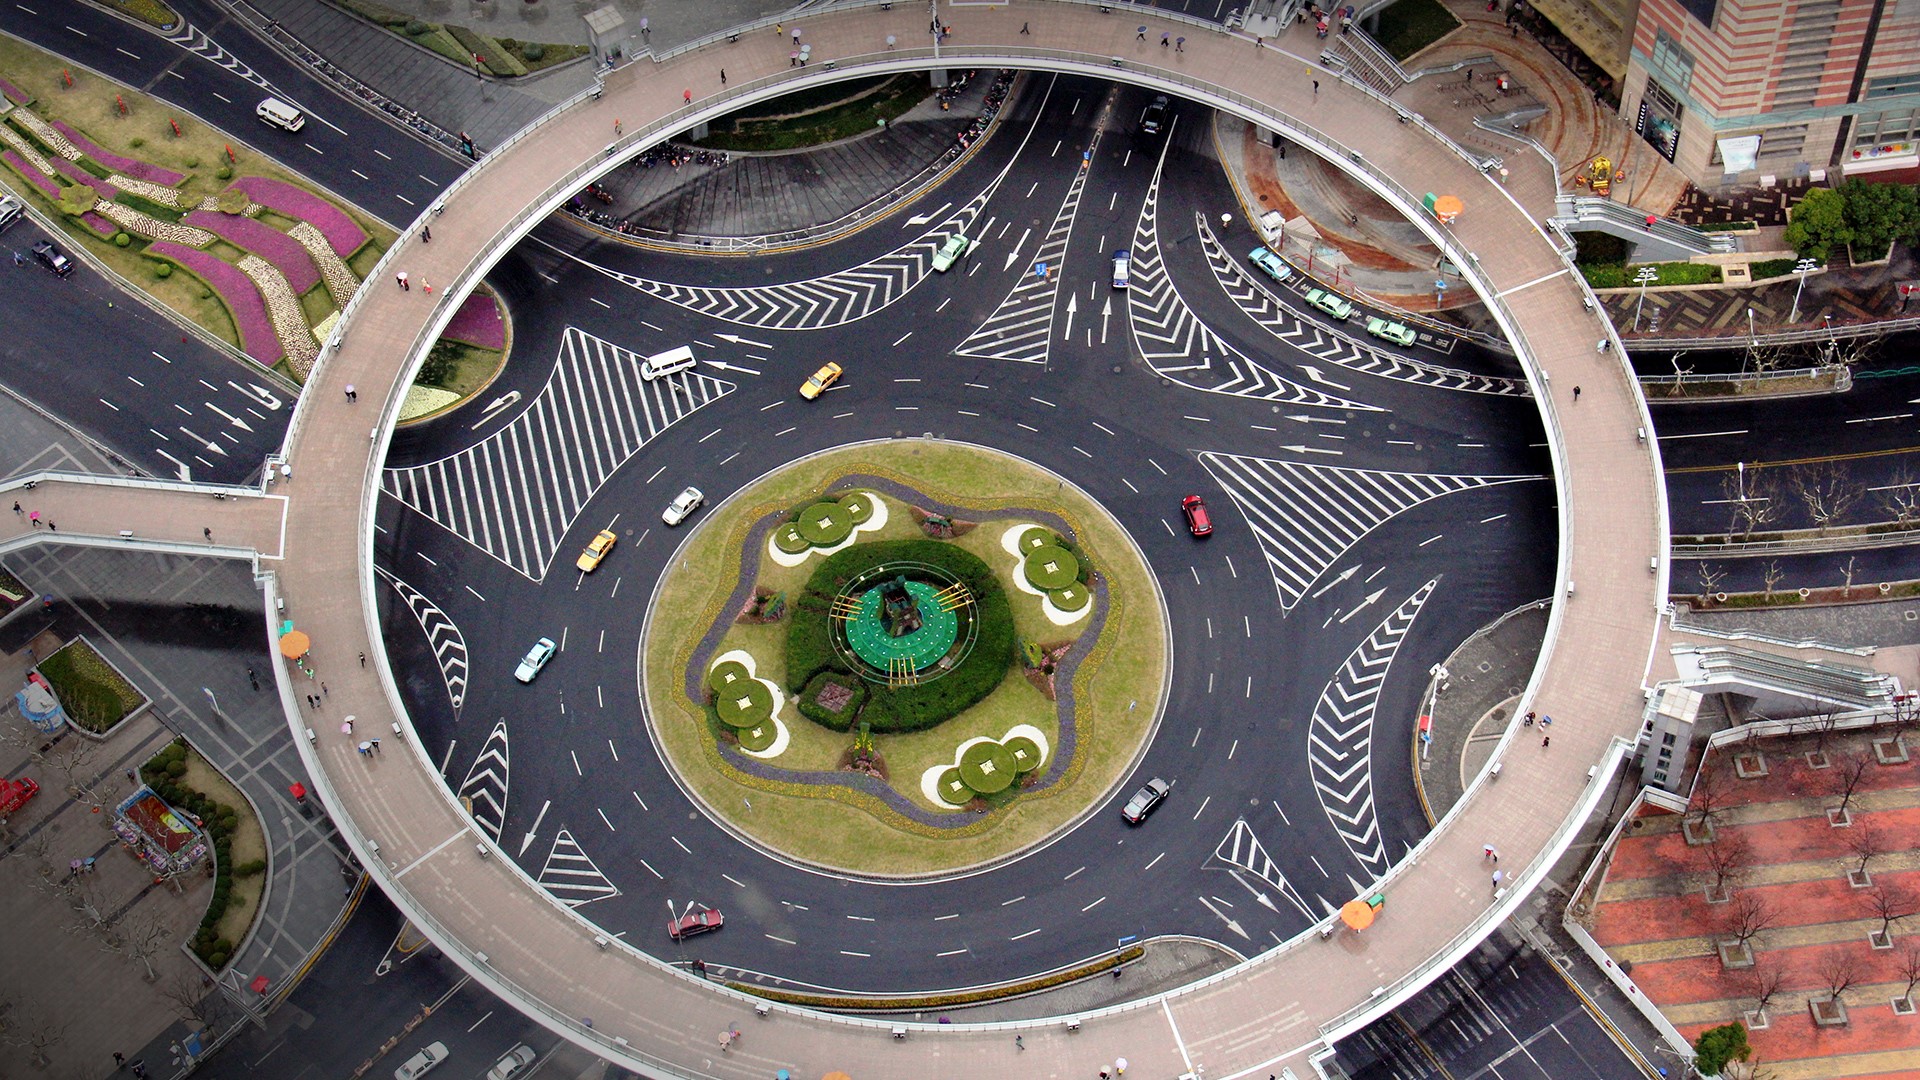 General 1920x1080 road architecture car building plants path roundabouts Mingzhu Roundabout Shanghai China